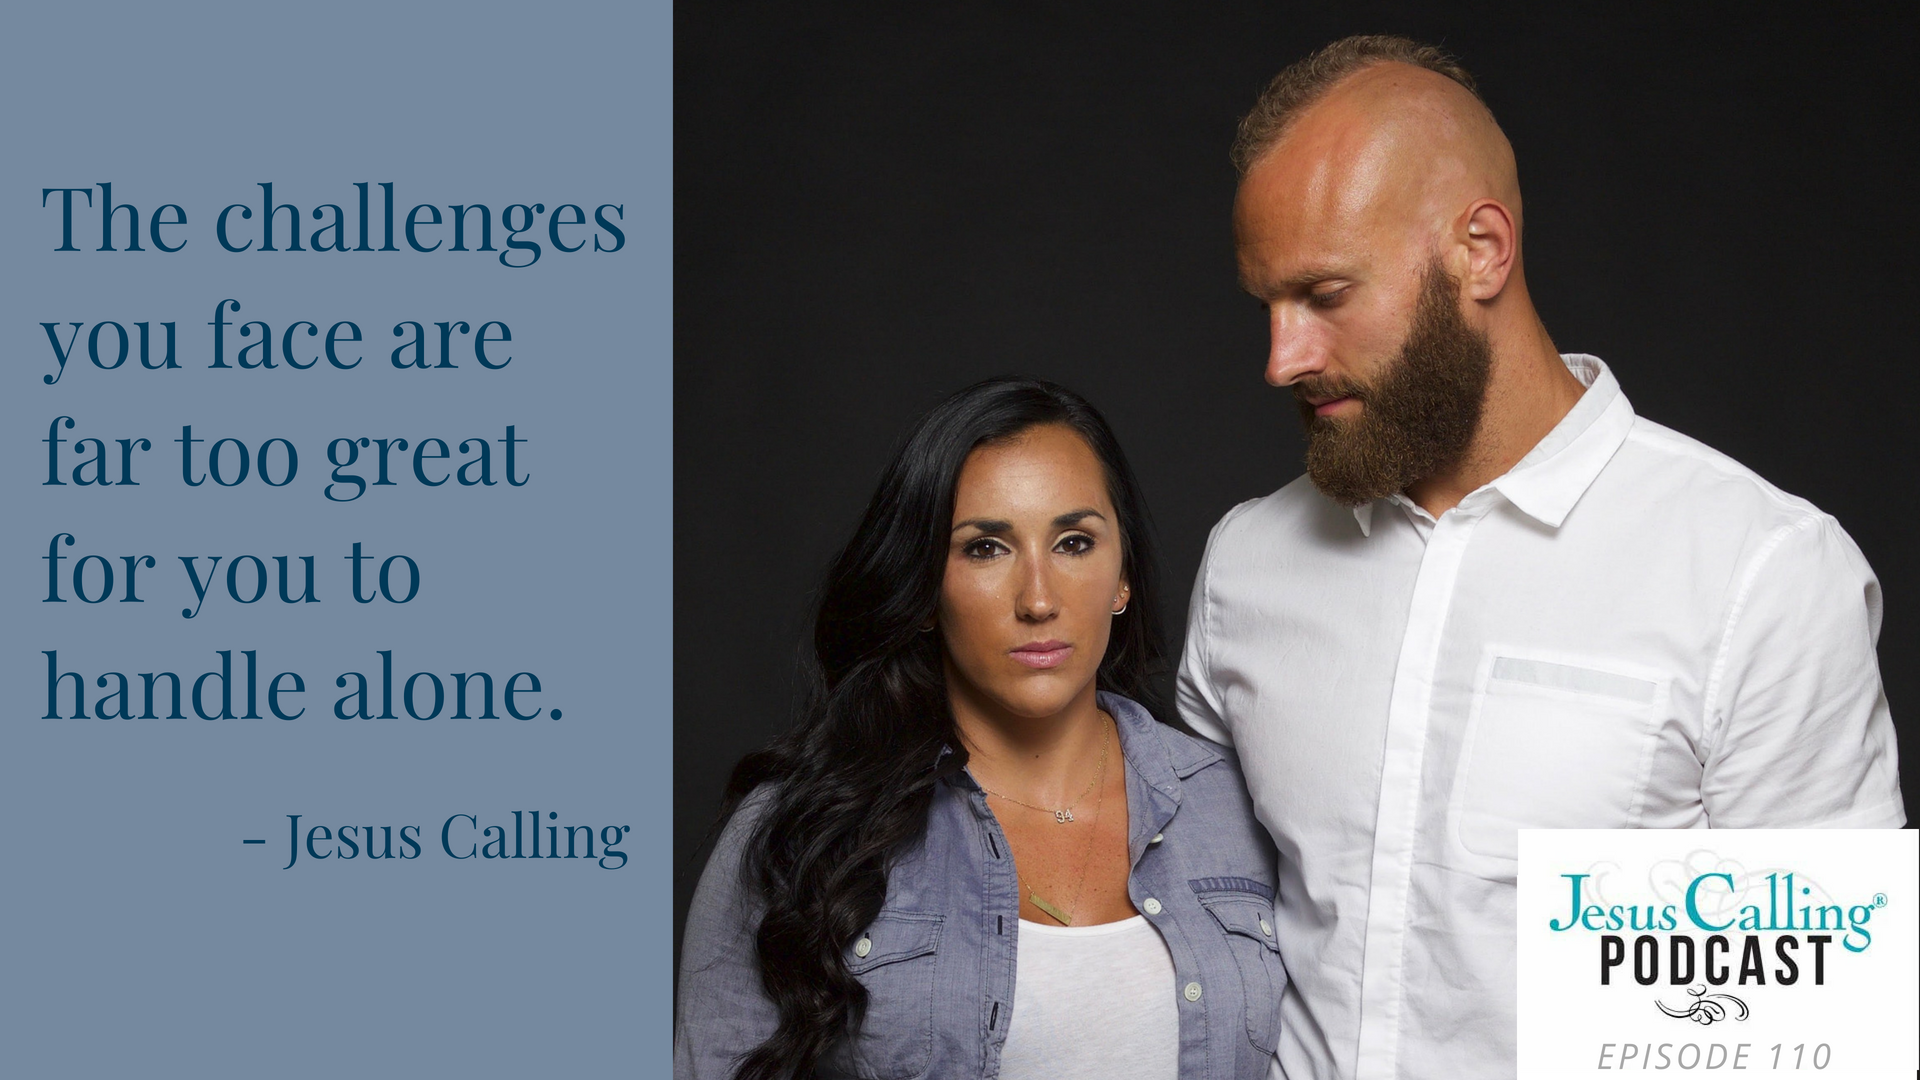 Mark and Danielle Herzlich as featured on the Jesus Calling podcast